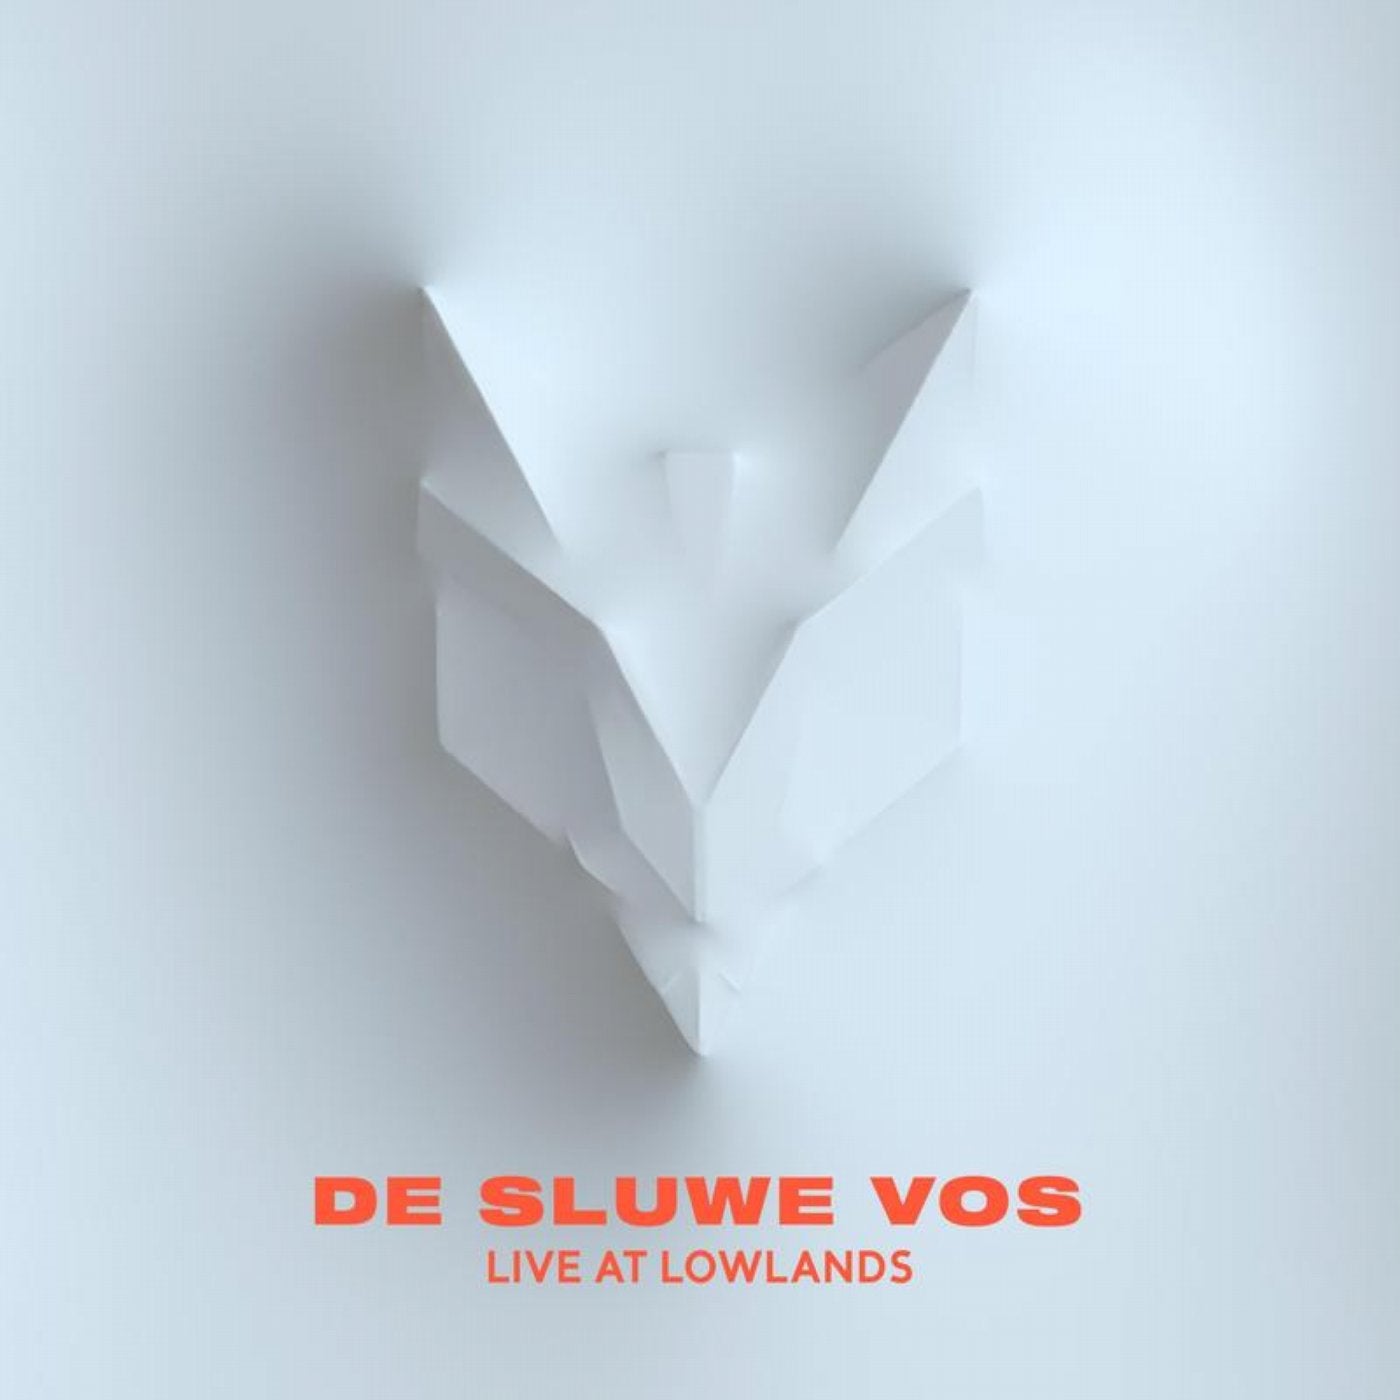 Live at Lowlands